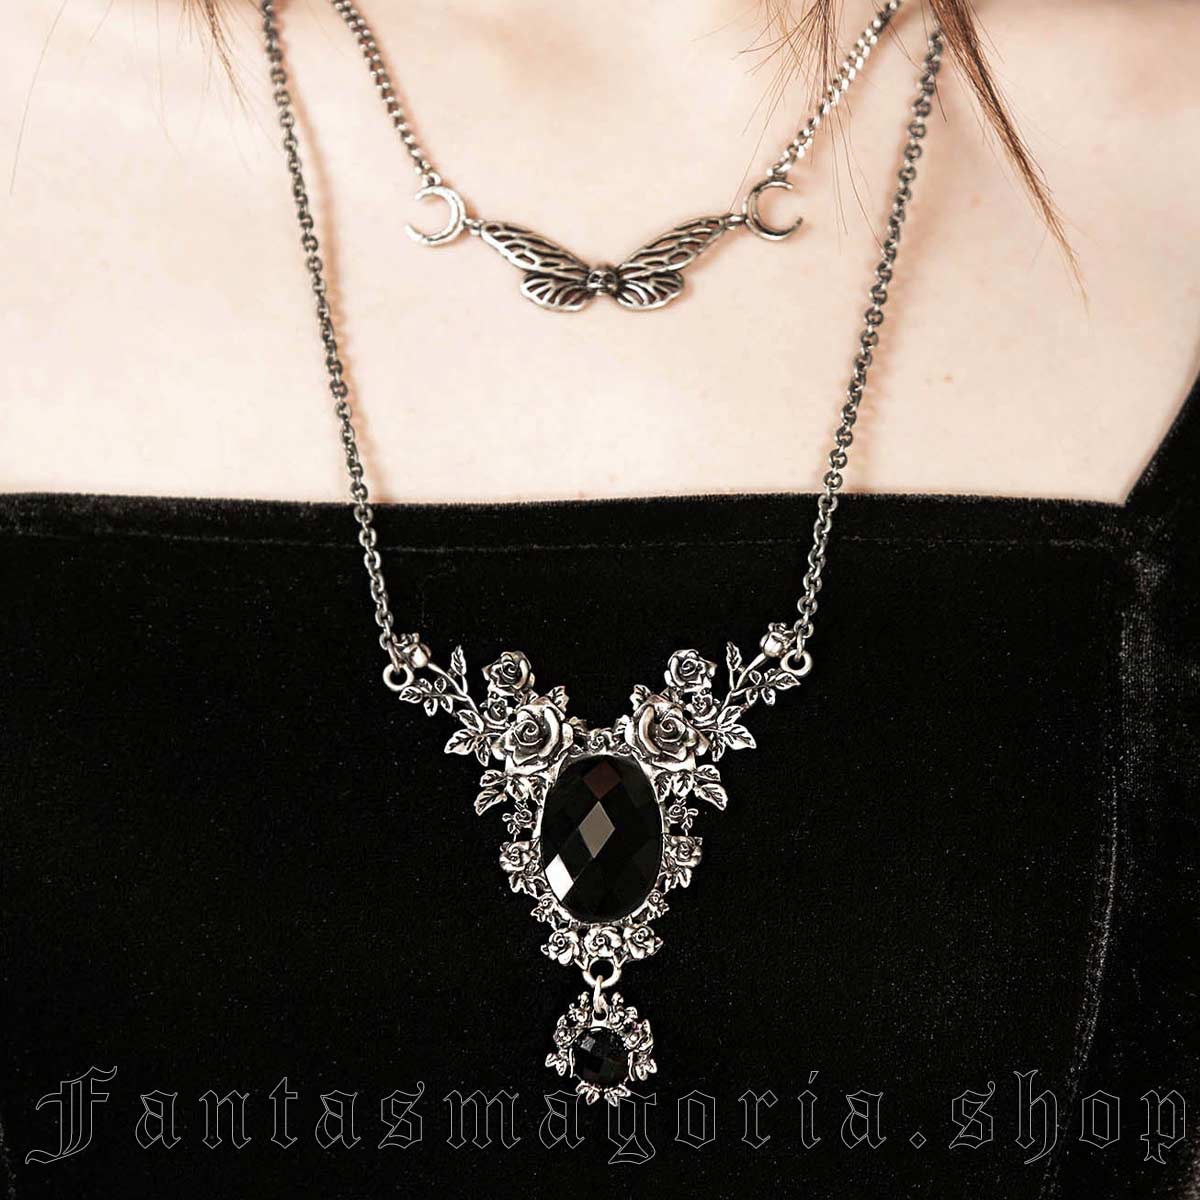 eternity thorn necklace